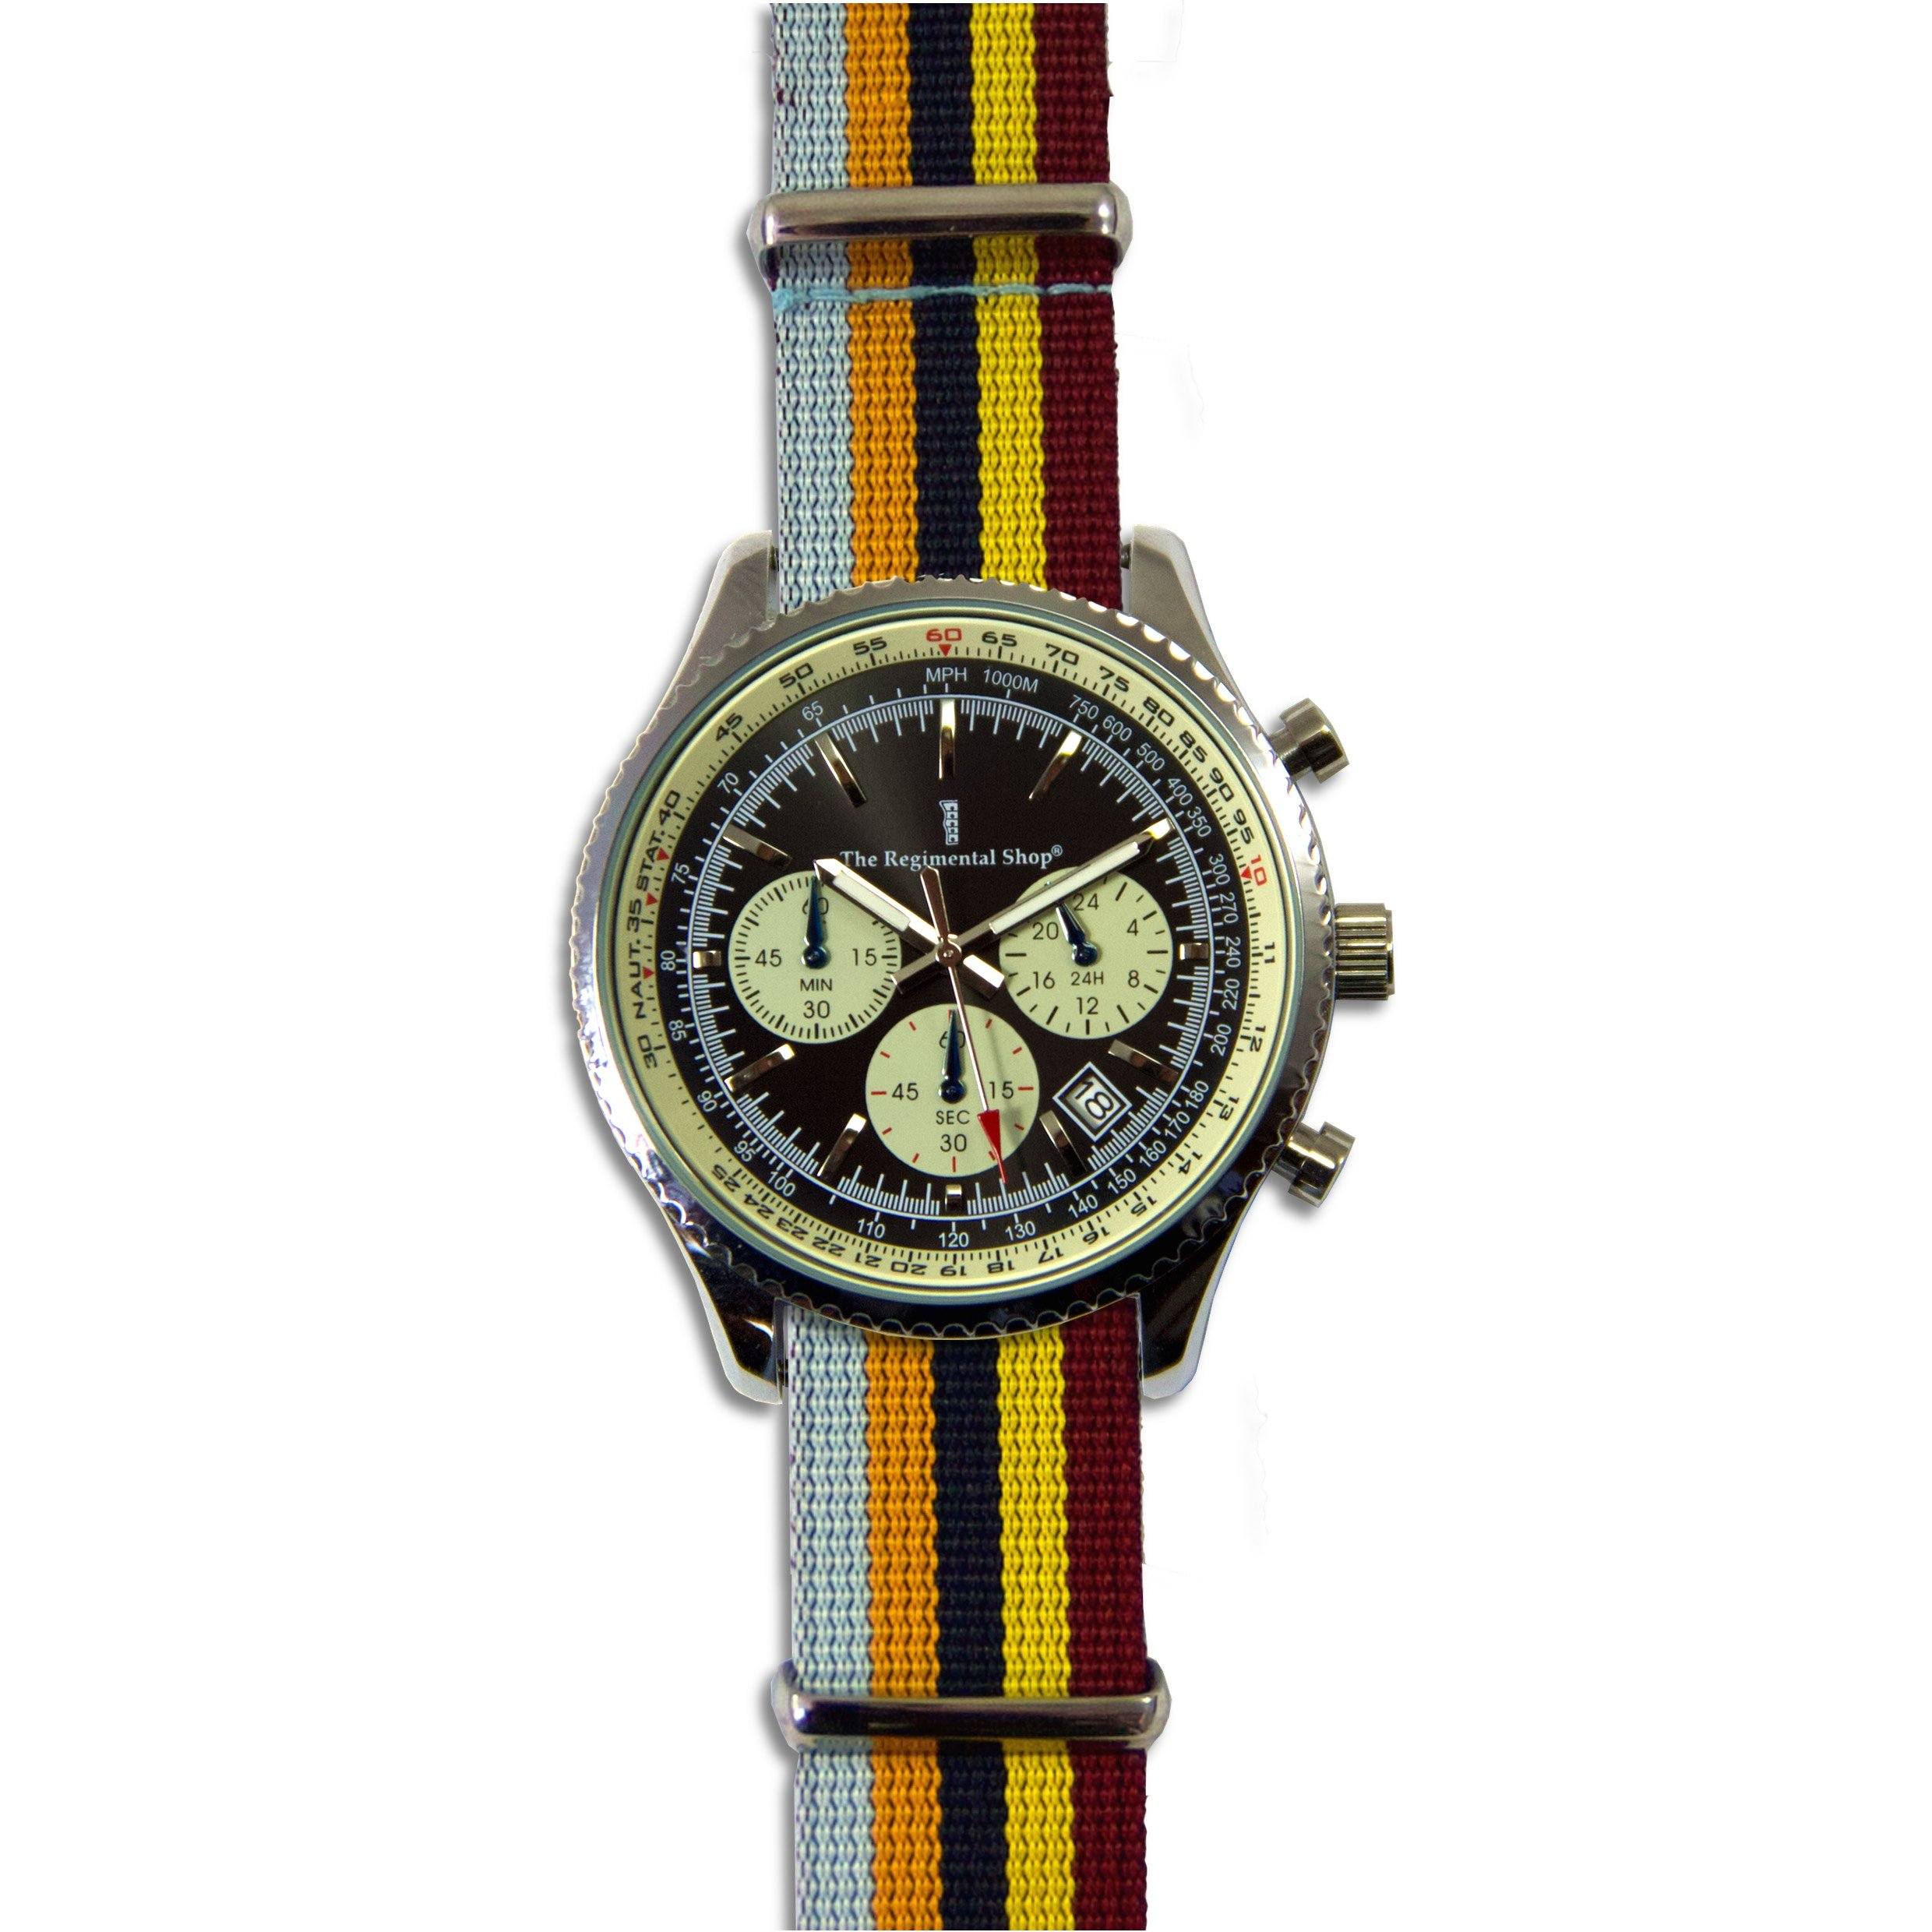 CUSTOM MADE SQN WATCHES - RSC Pilot's Watches